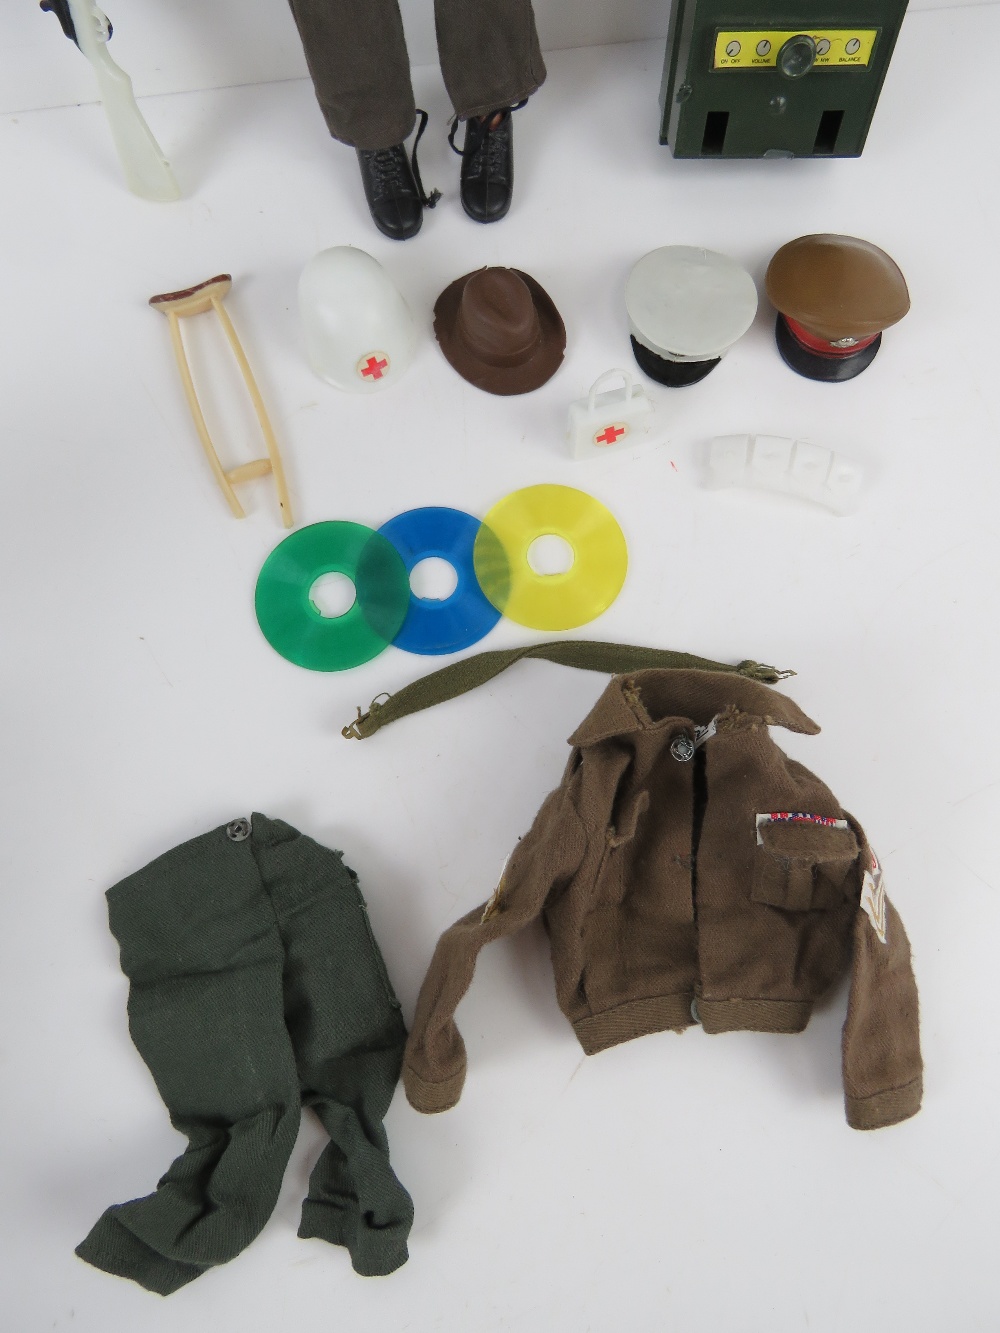 A vintage Action Man made by Palitoy with assorted accessories including; jacket, trousers, hats, - Image 3 of 3